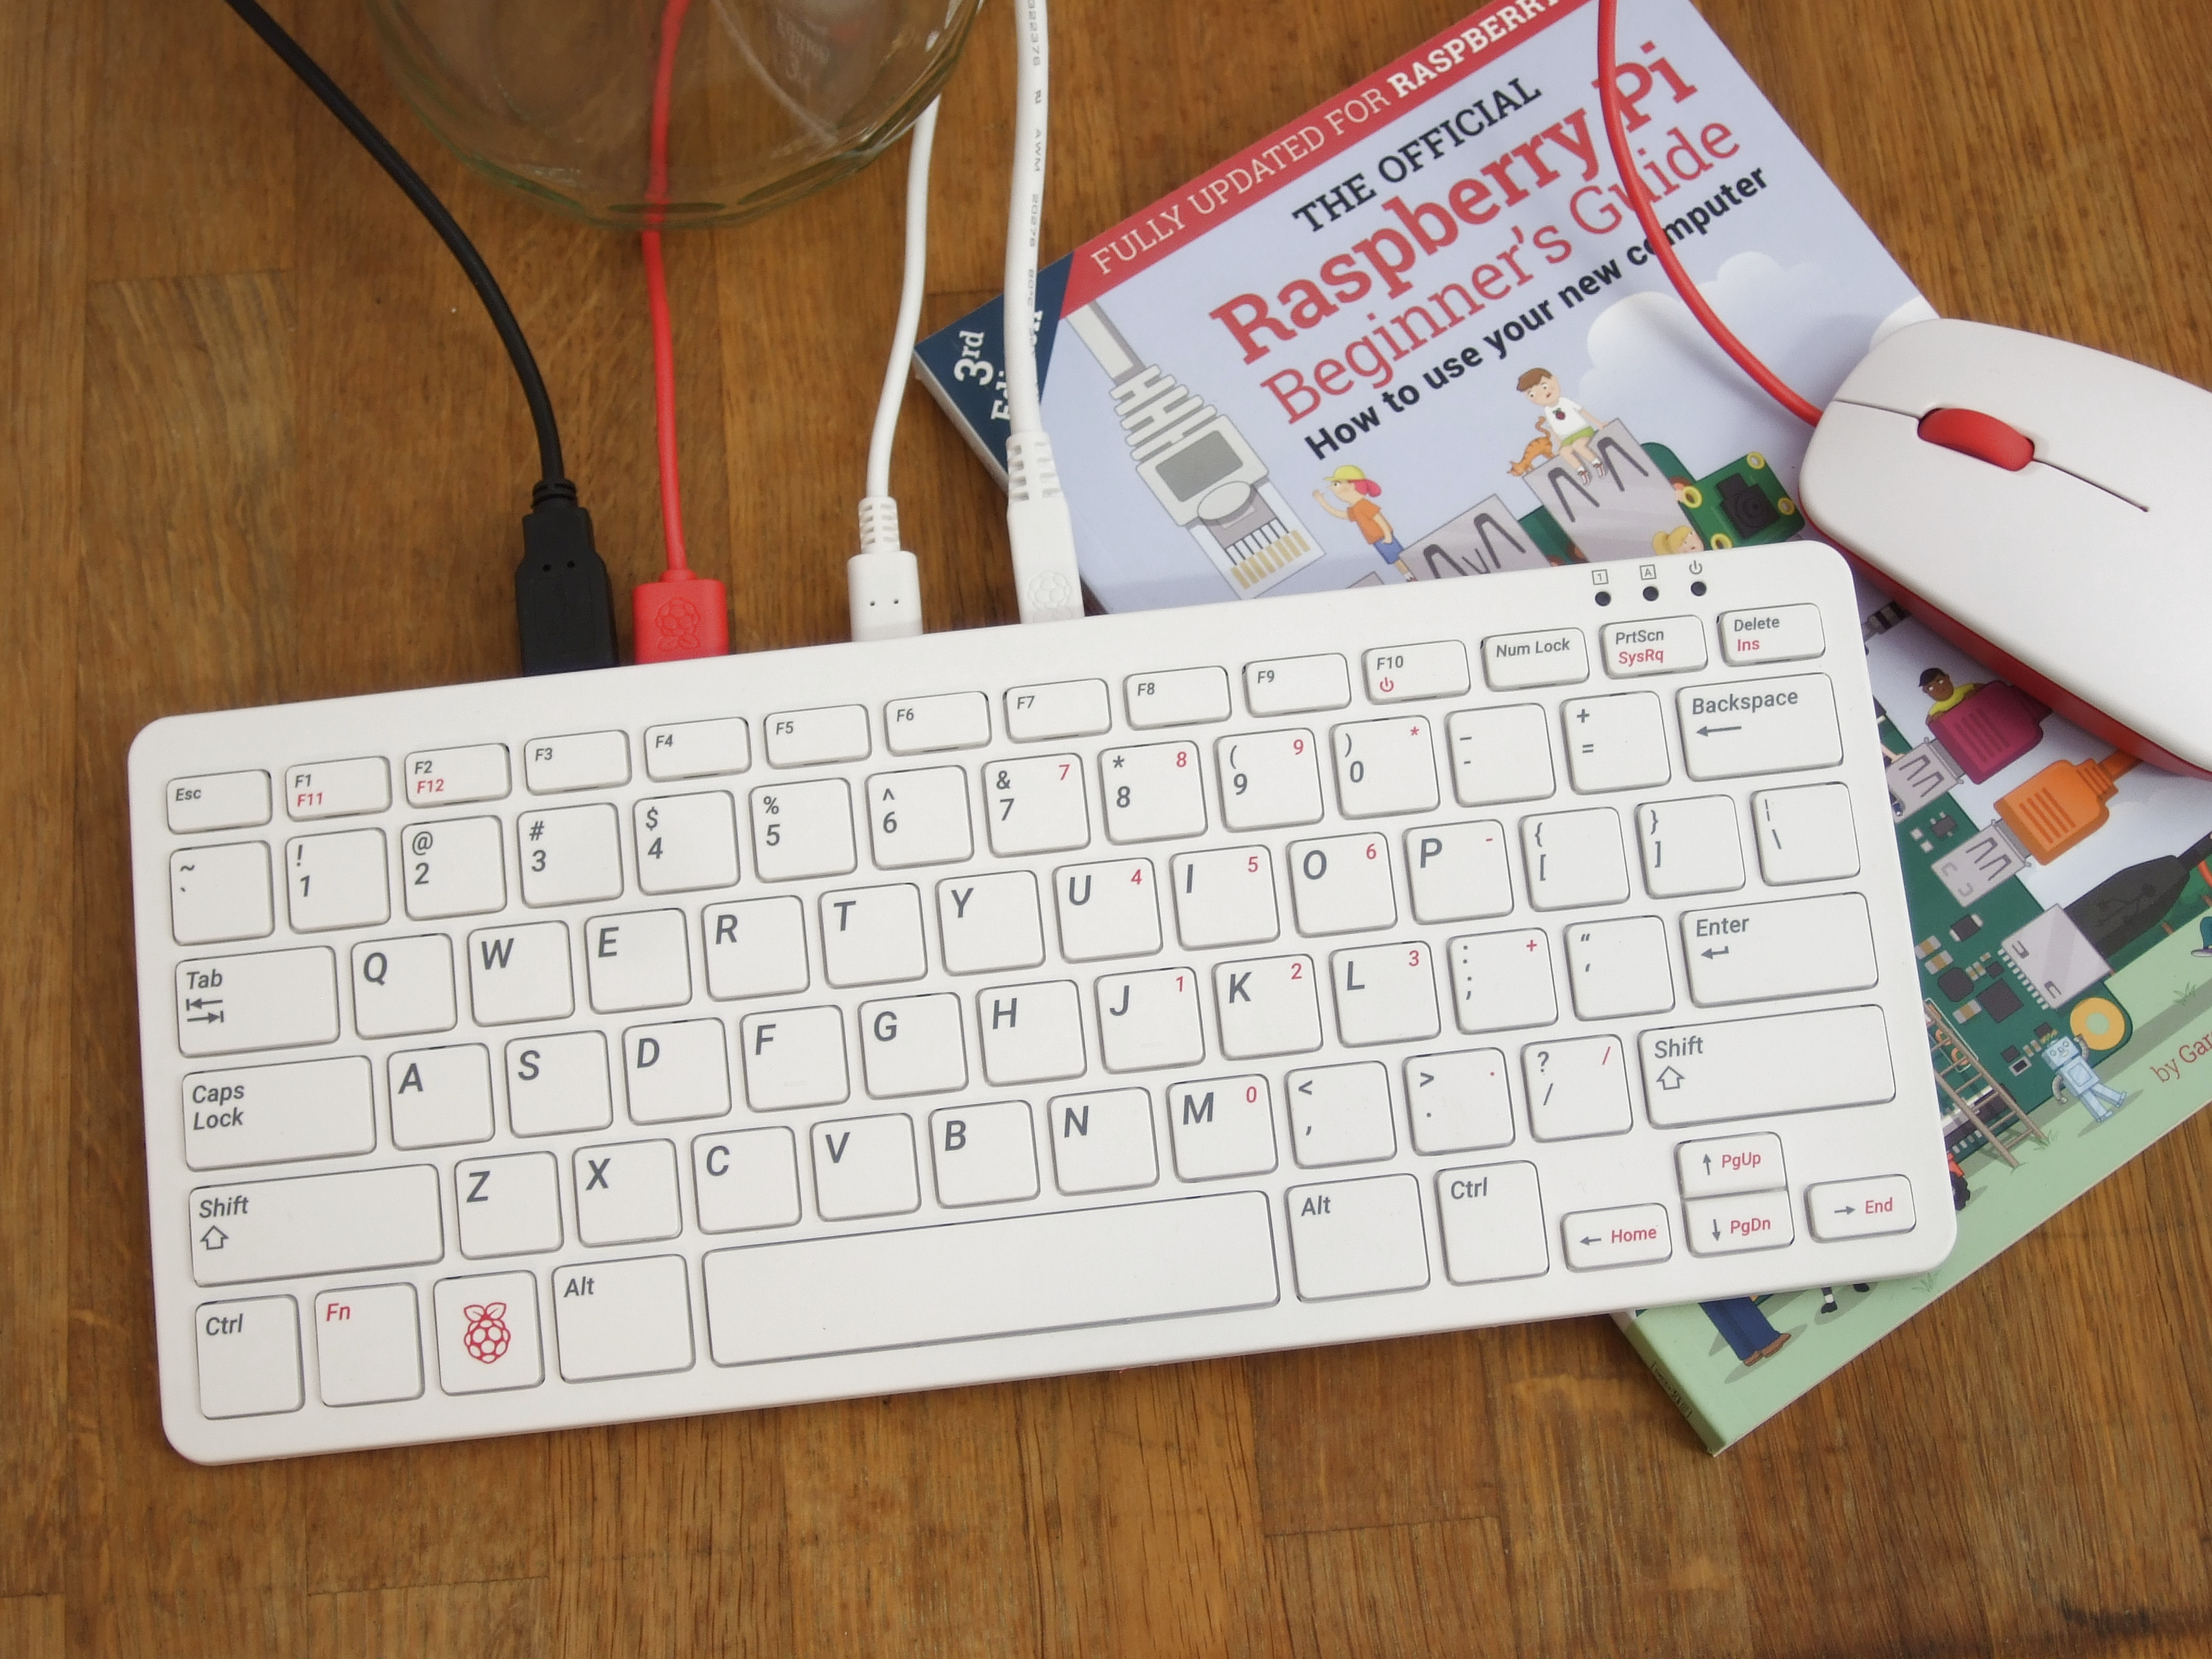 New Raspberry Pi 400 Is A Computer In A Keyboard For $70 | Hackaday